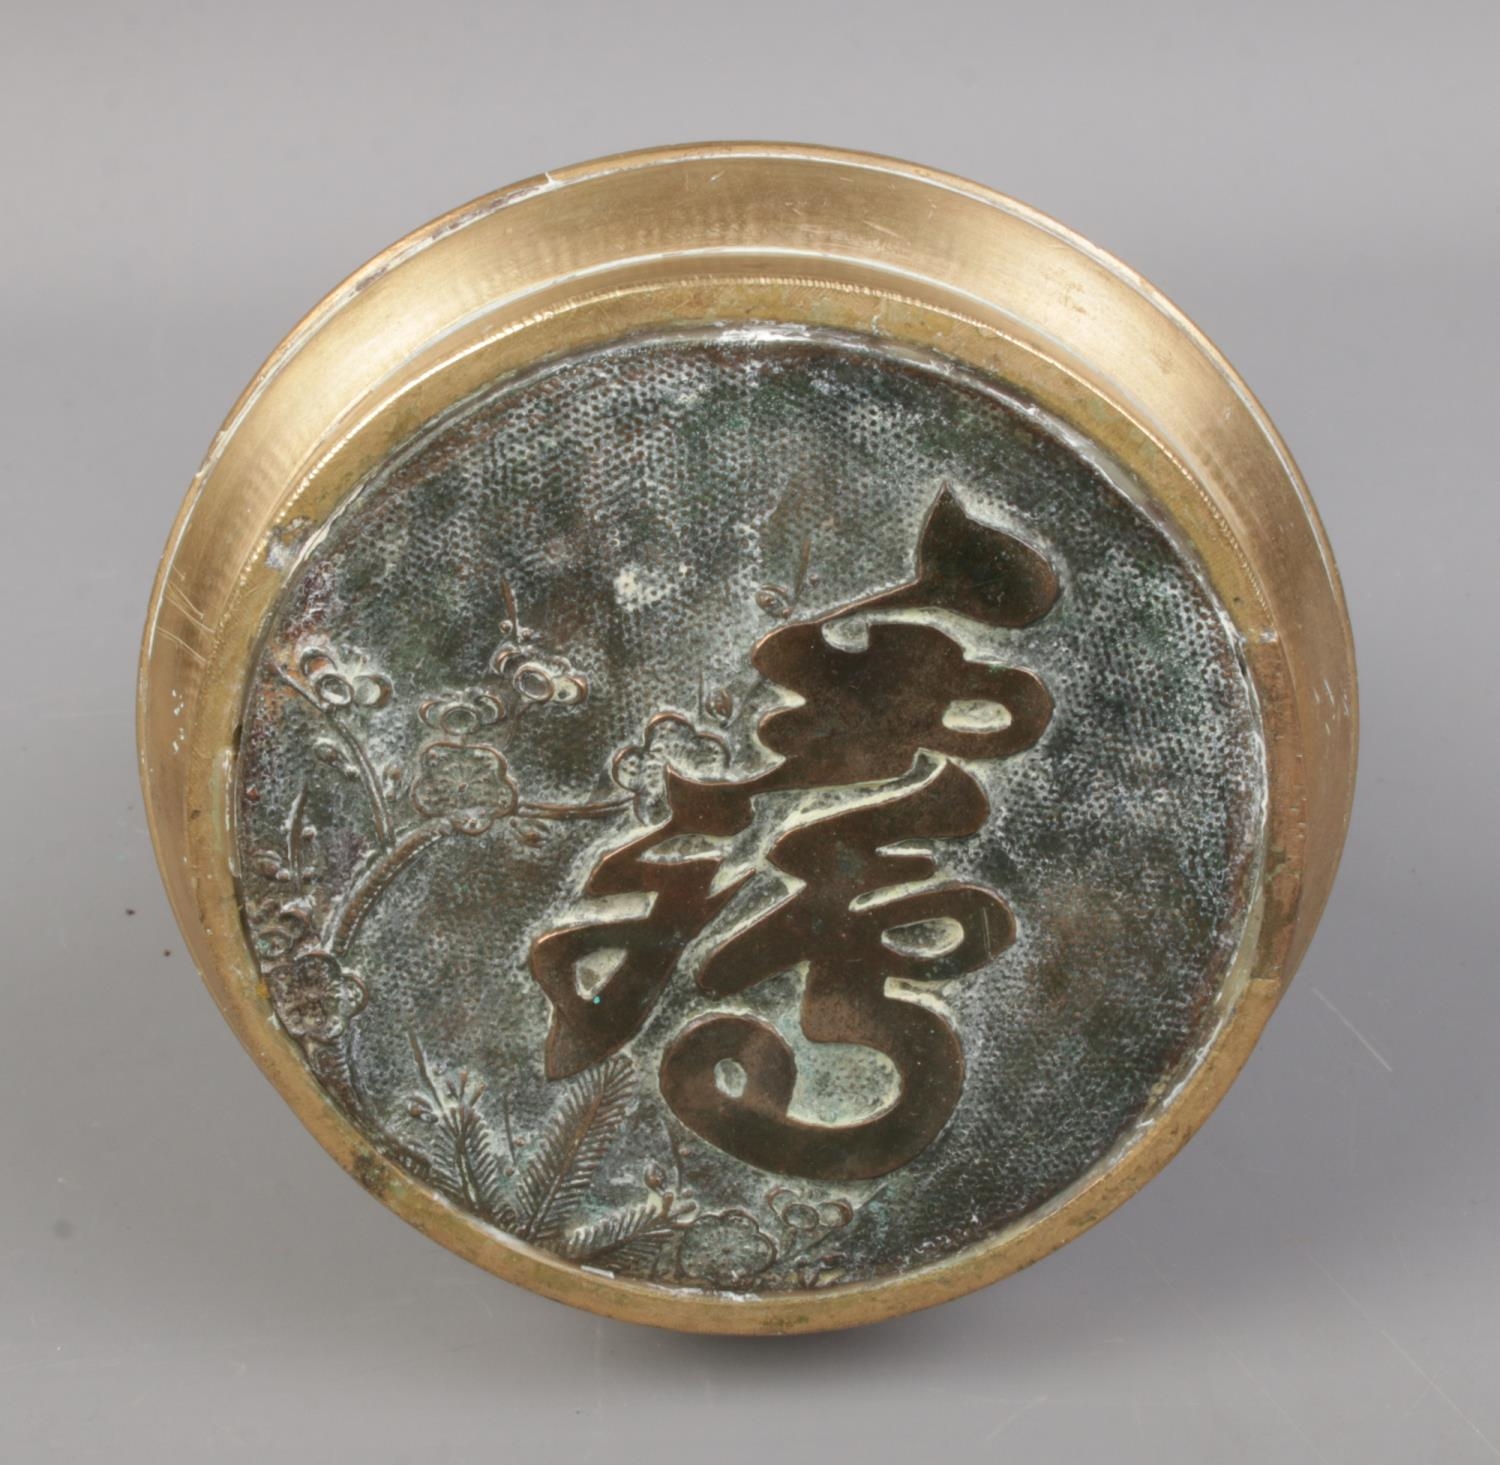 A Chinese brass seal featuring elephant head handles and floral decoration. - Image 2 of 2